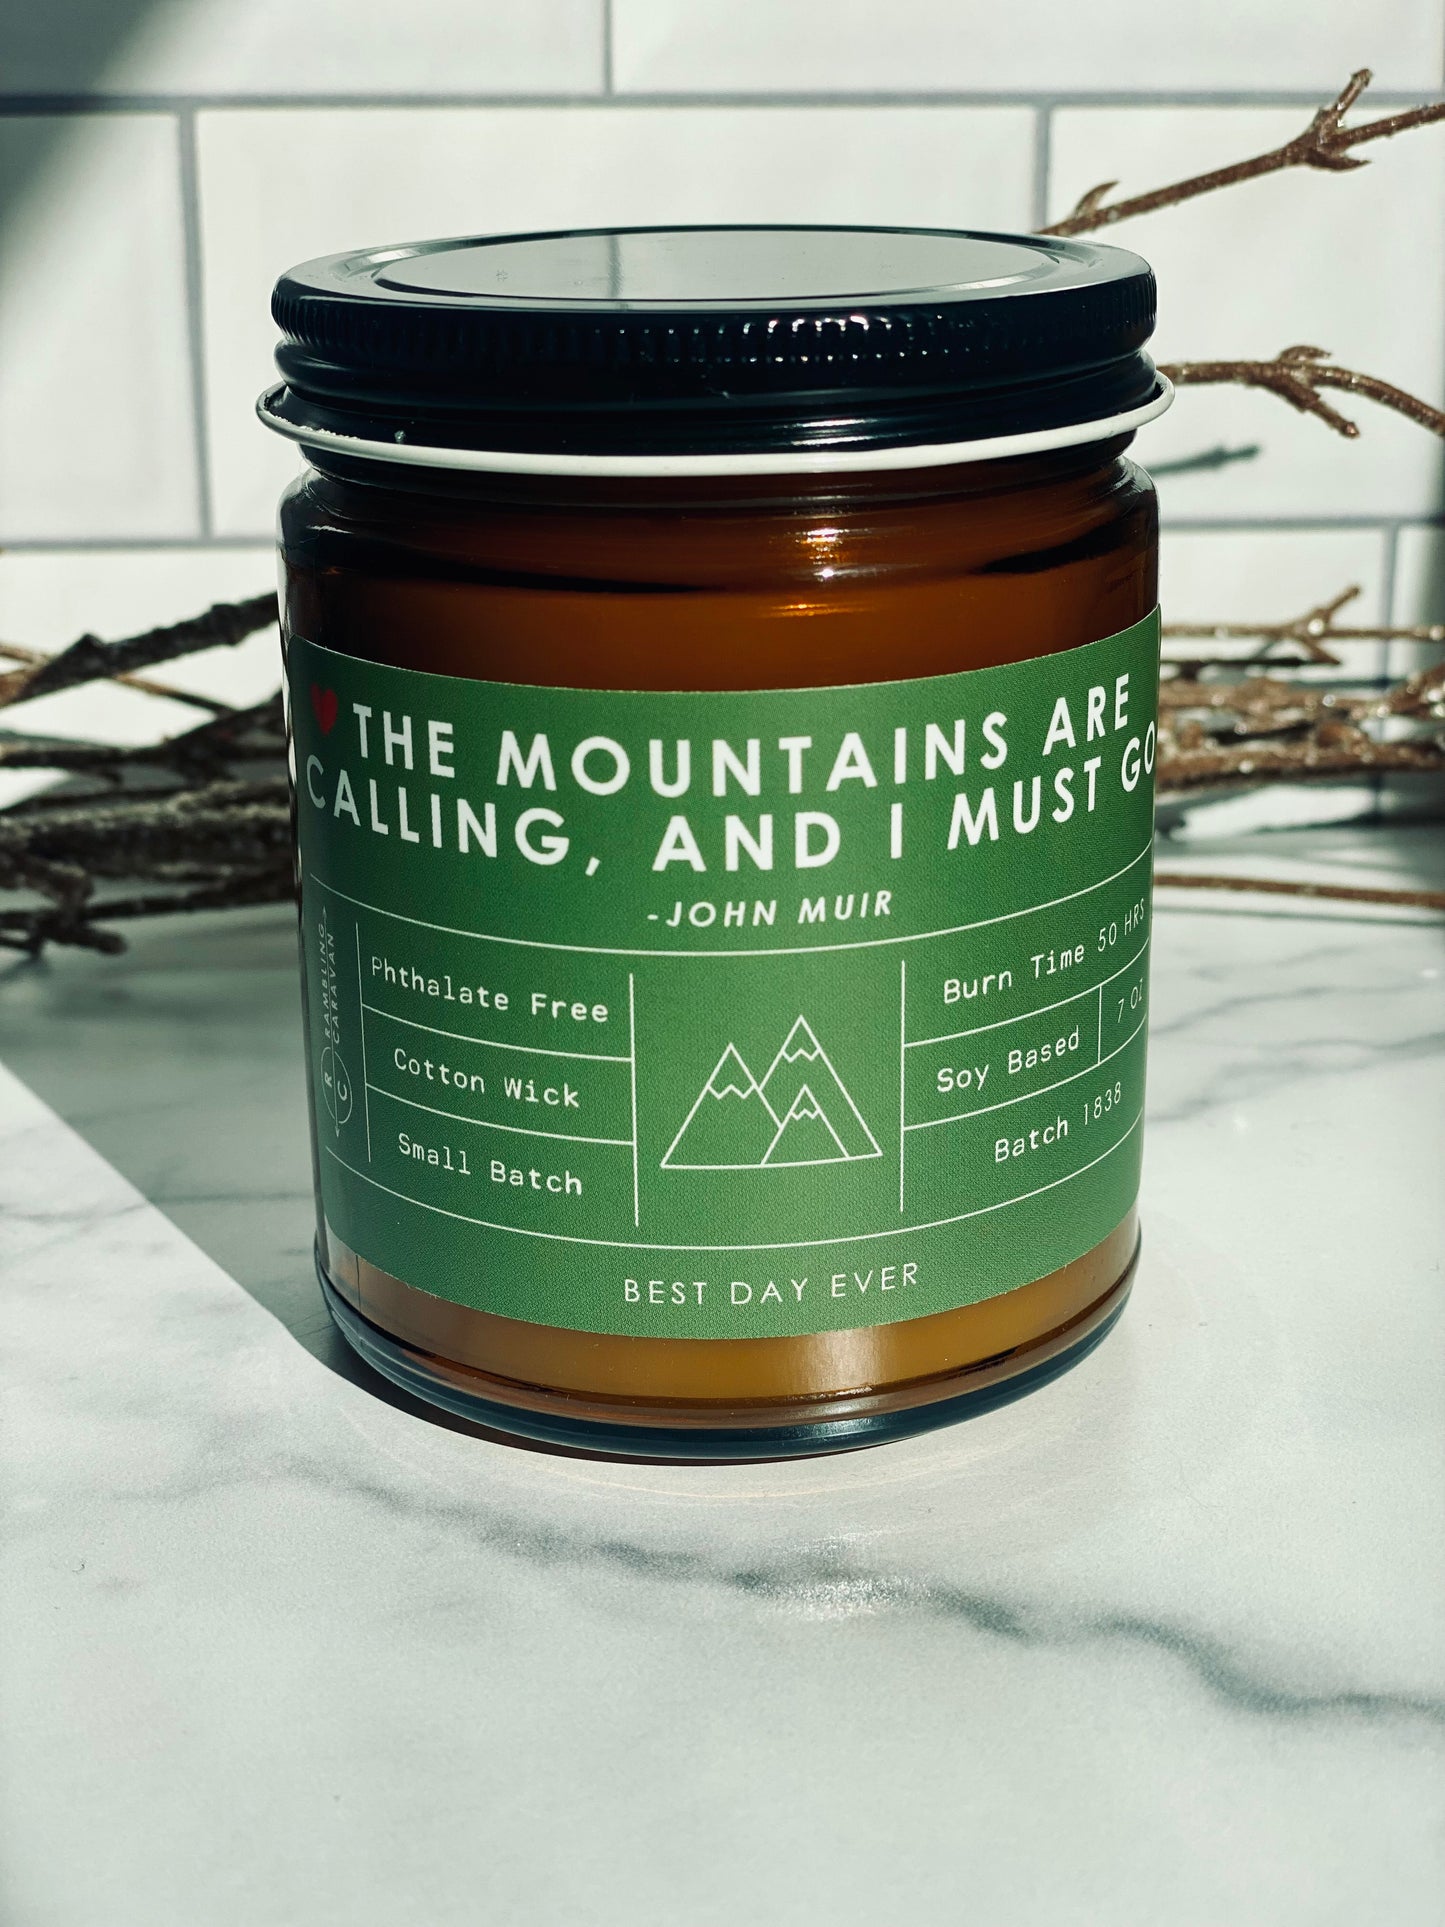 The Mountains Are Calling, And I Must Go (John Muir) Candle